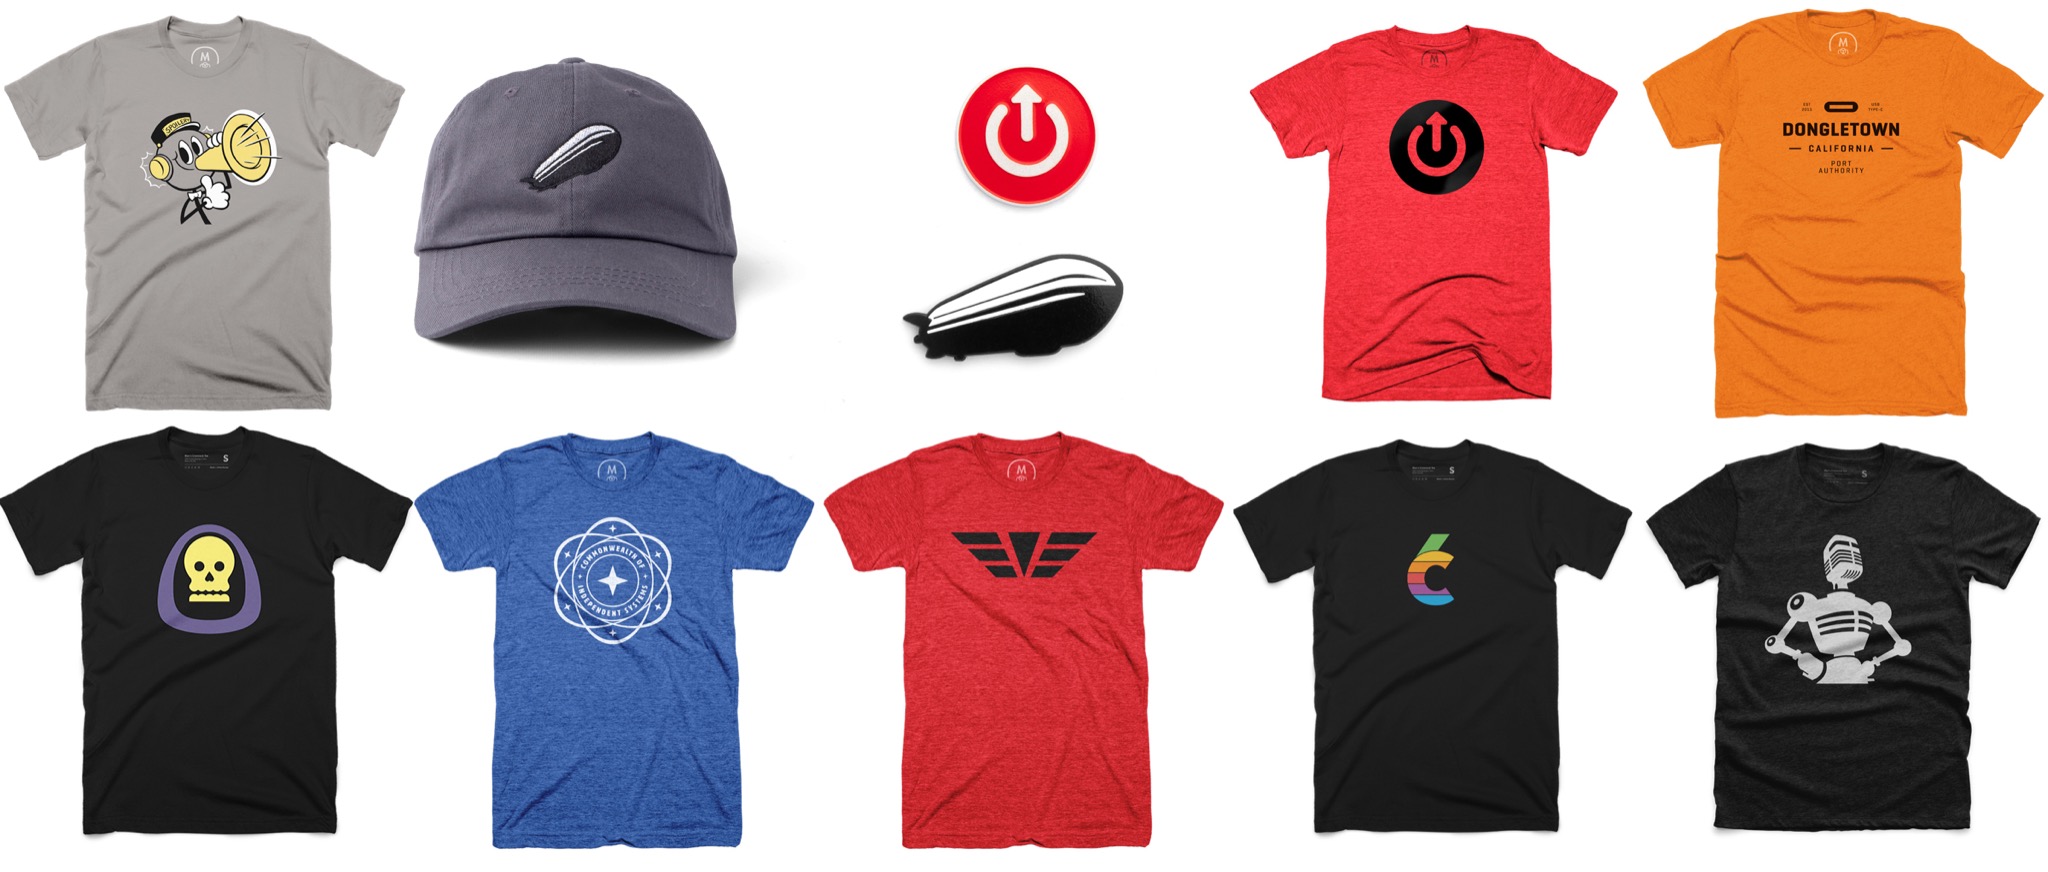 All the merchandise is for sale right now – Six Colors